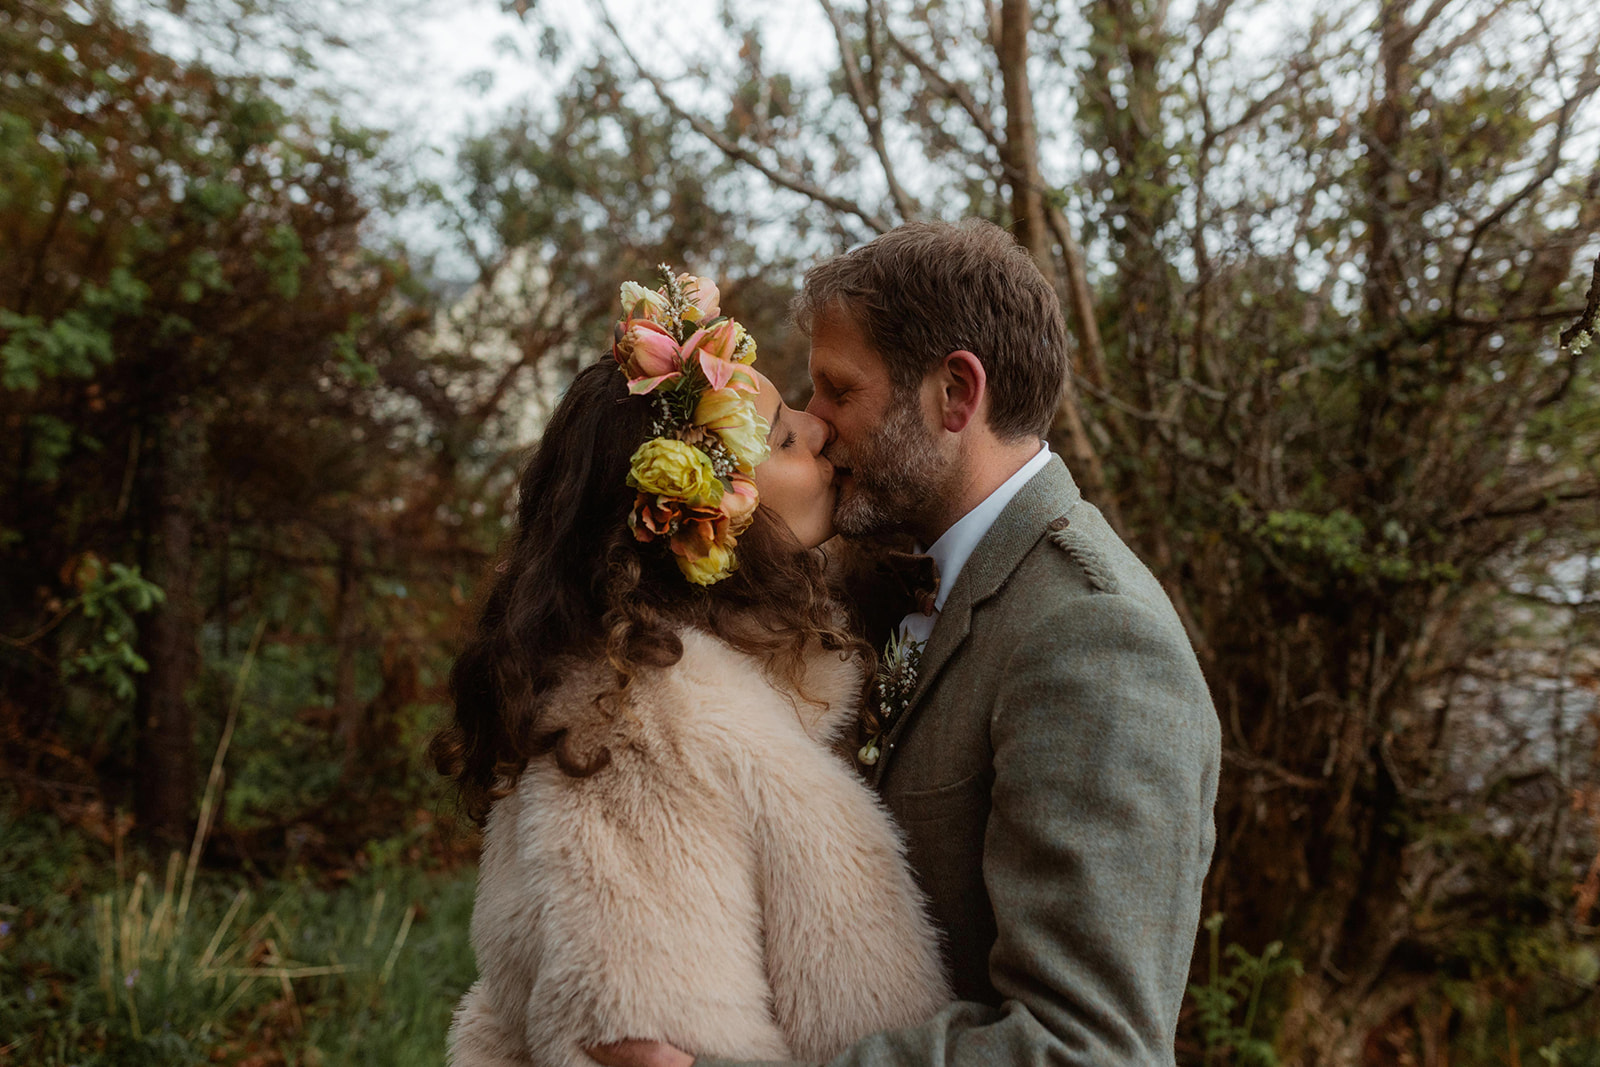 Rebecca and Simon shared a romantic moment after their Isle of Skye elopement ceremony.